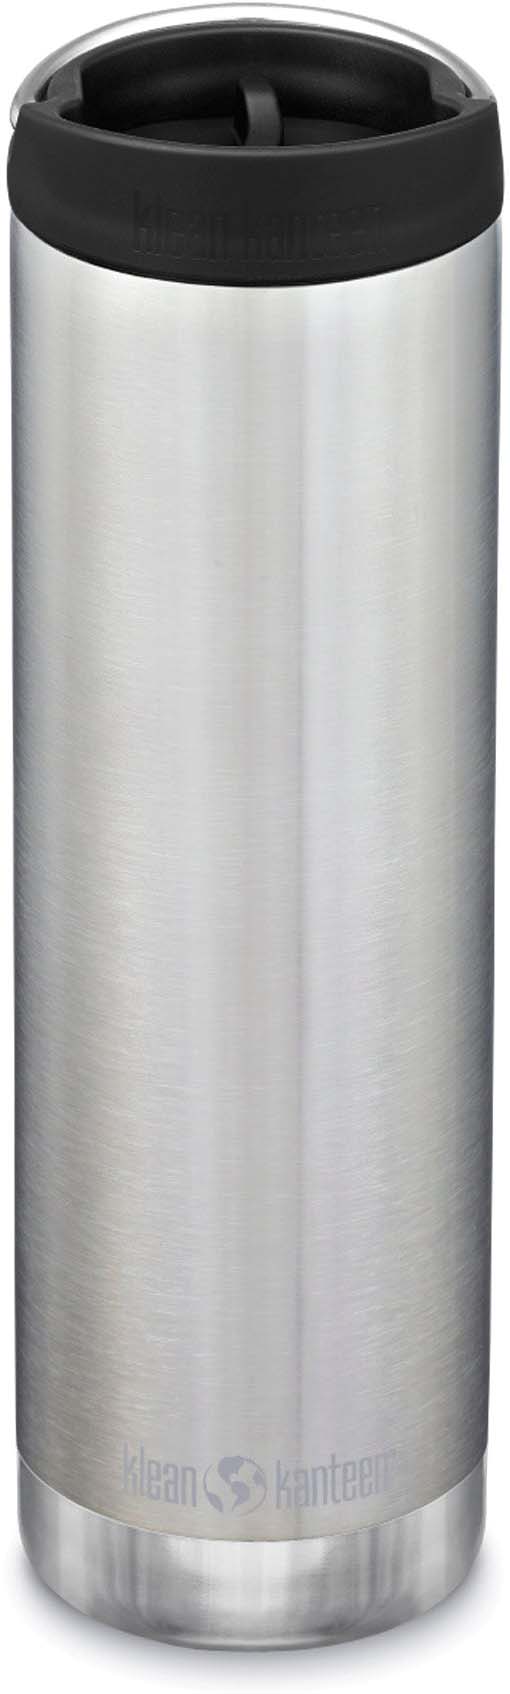 https://cs1.0ps.us/original/opplanet-klean-kanteen-insulated-tkwide-w-cafe-cap-20oz-brushed-stainless-1008322-main